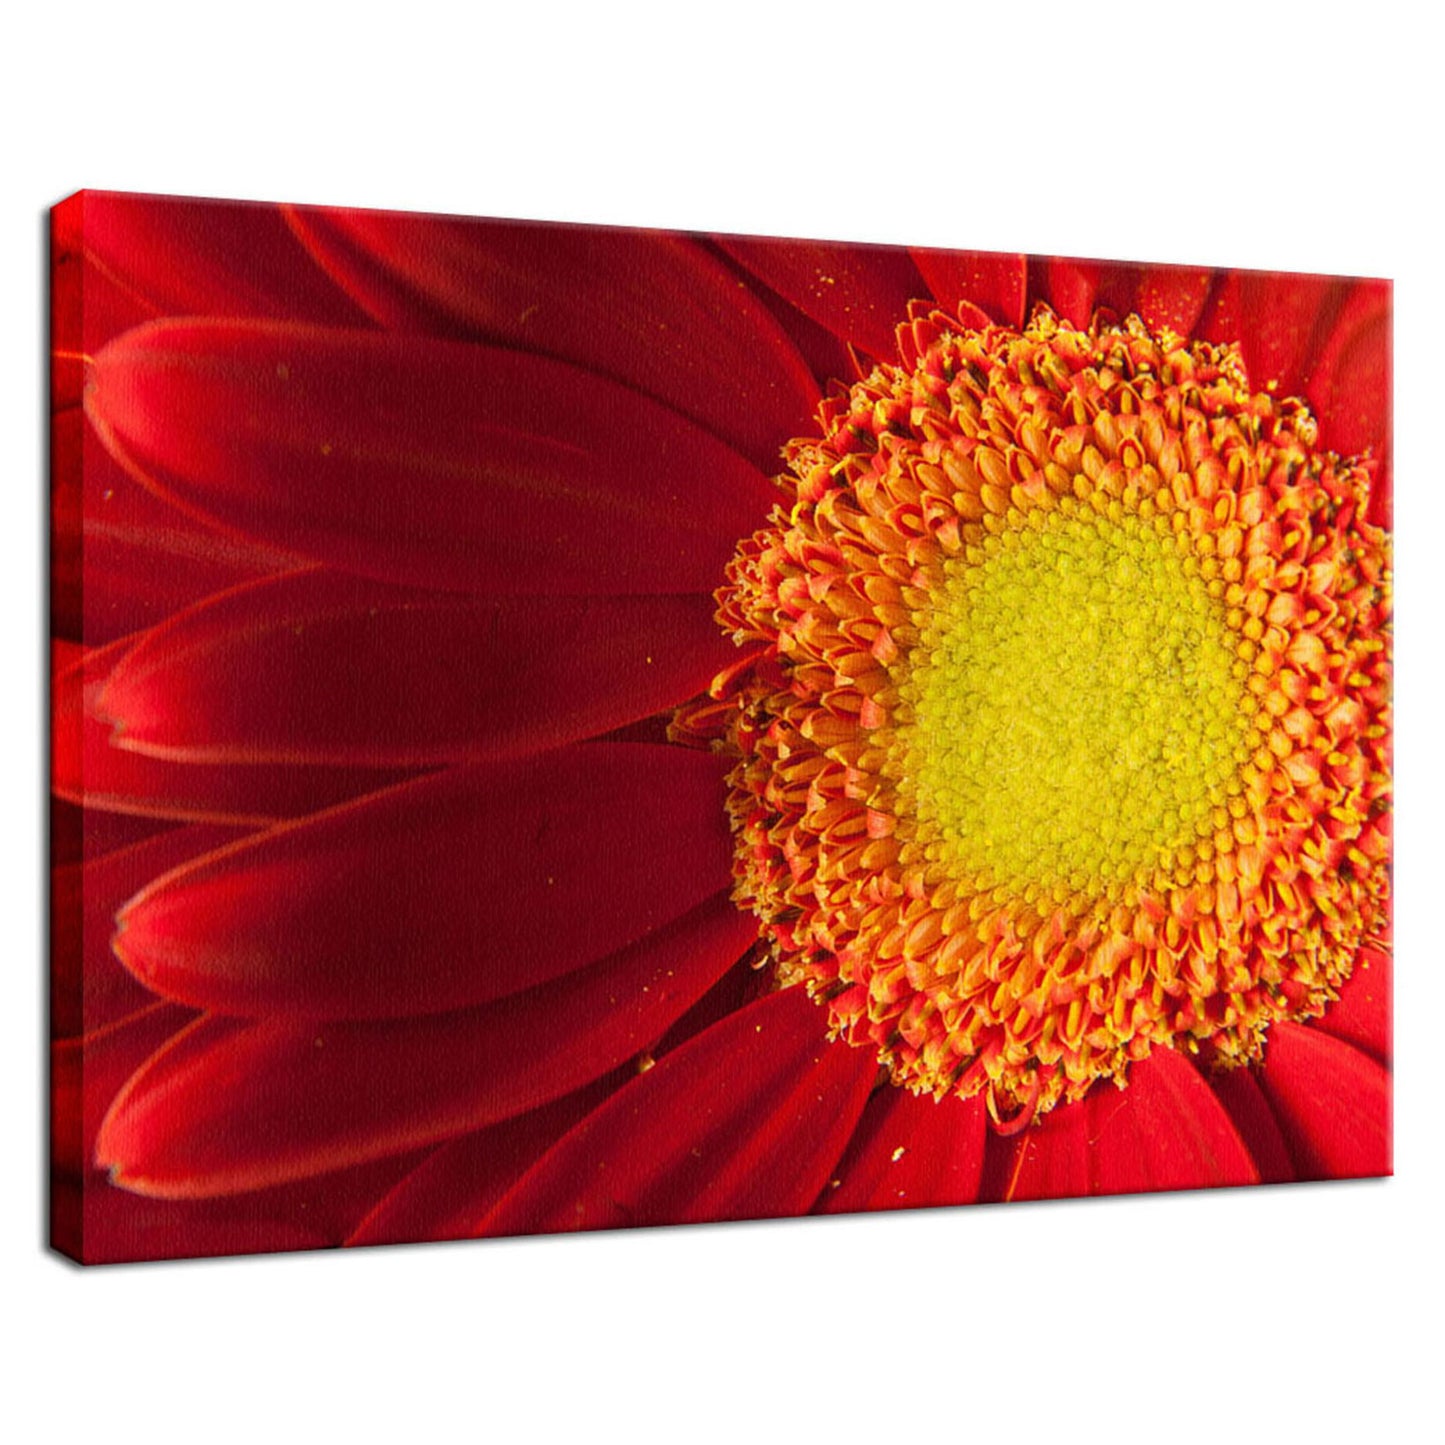 Nature's Beauty Nature / Floral Photo Fine Art Canvas Wall Art Prints  - PIPAFINEART